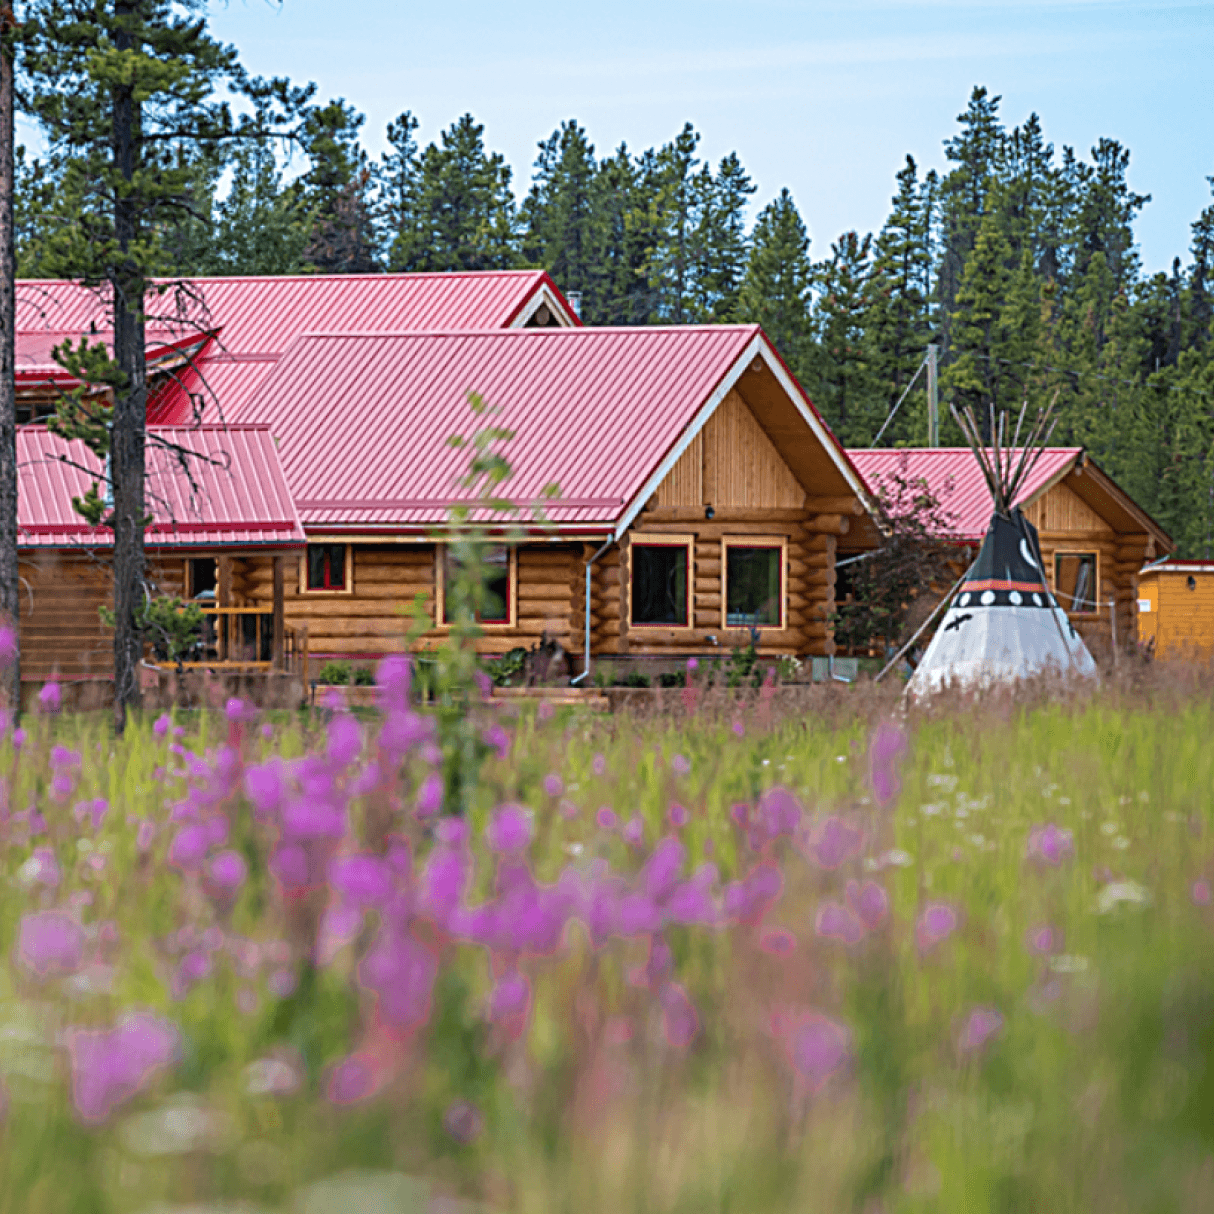 Large log cabins with a red steel rooves are surrounded by a field of long green grass and purple flowers. Beside one cabin is a black and white teepee. 